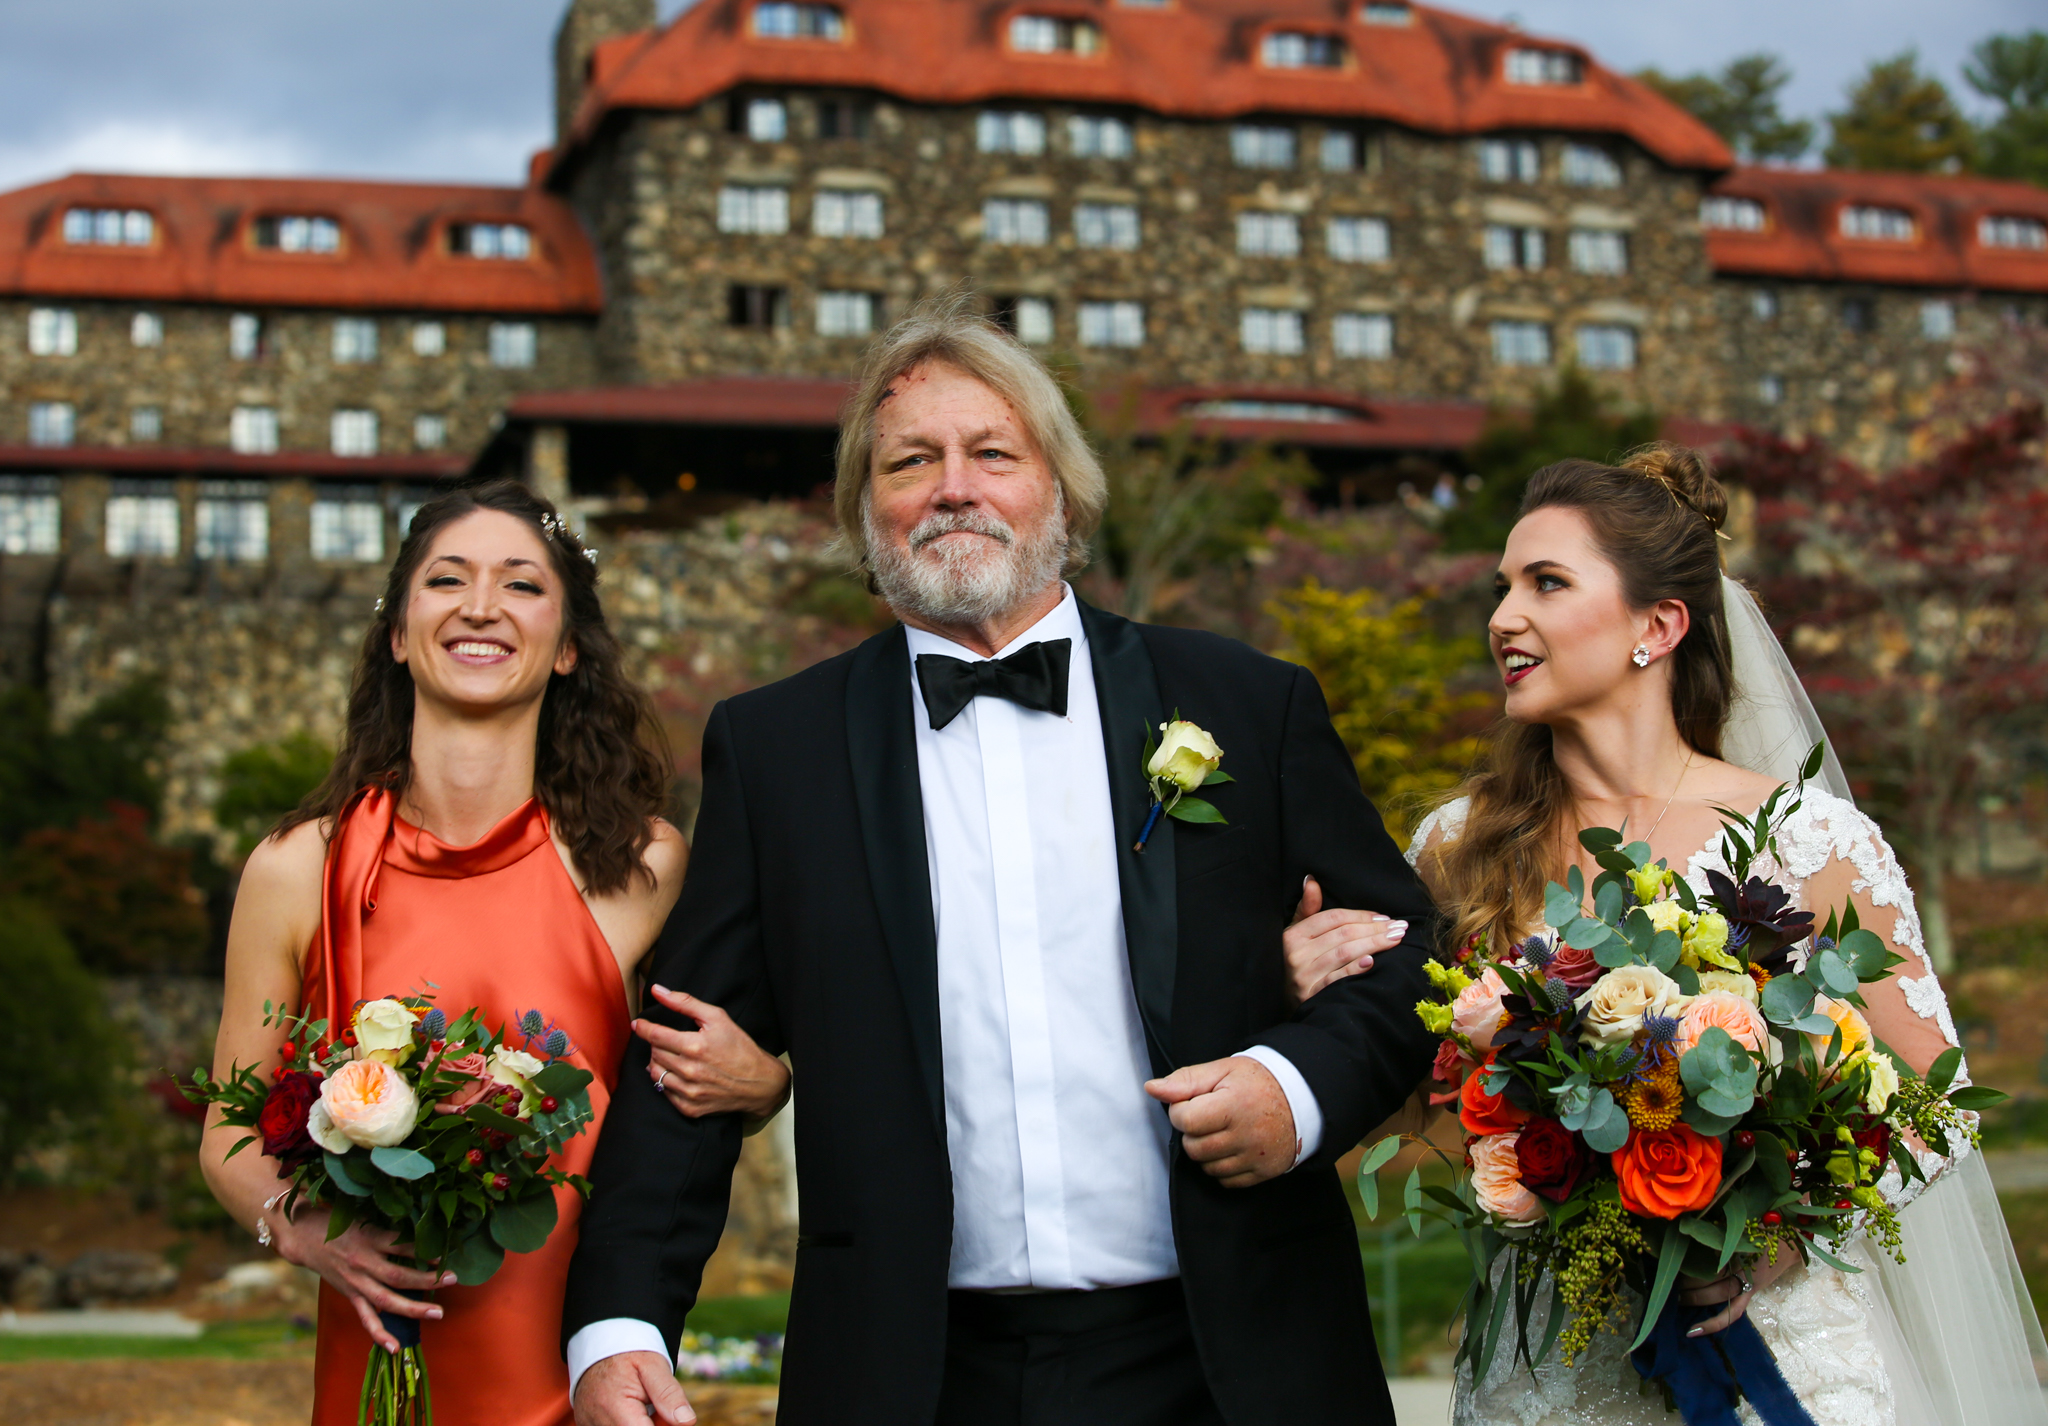 The Omni Grove Park Inn Is the perfect place to get married in Asheville, NC.